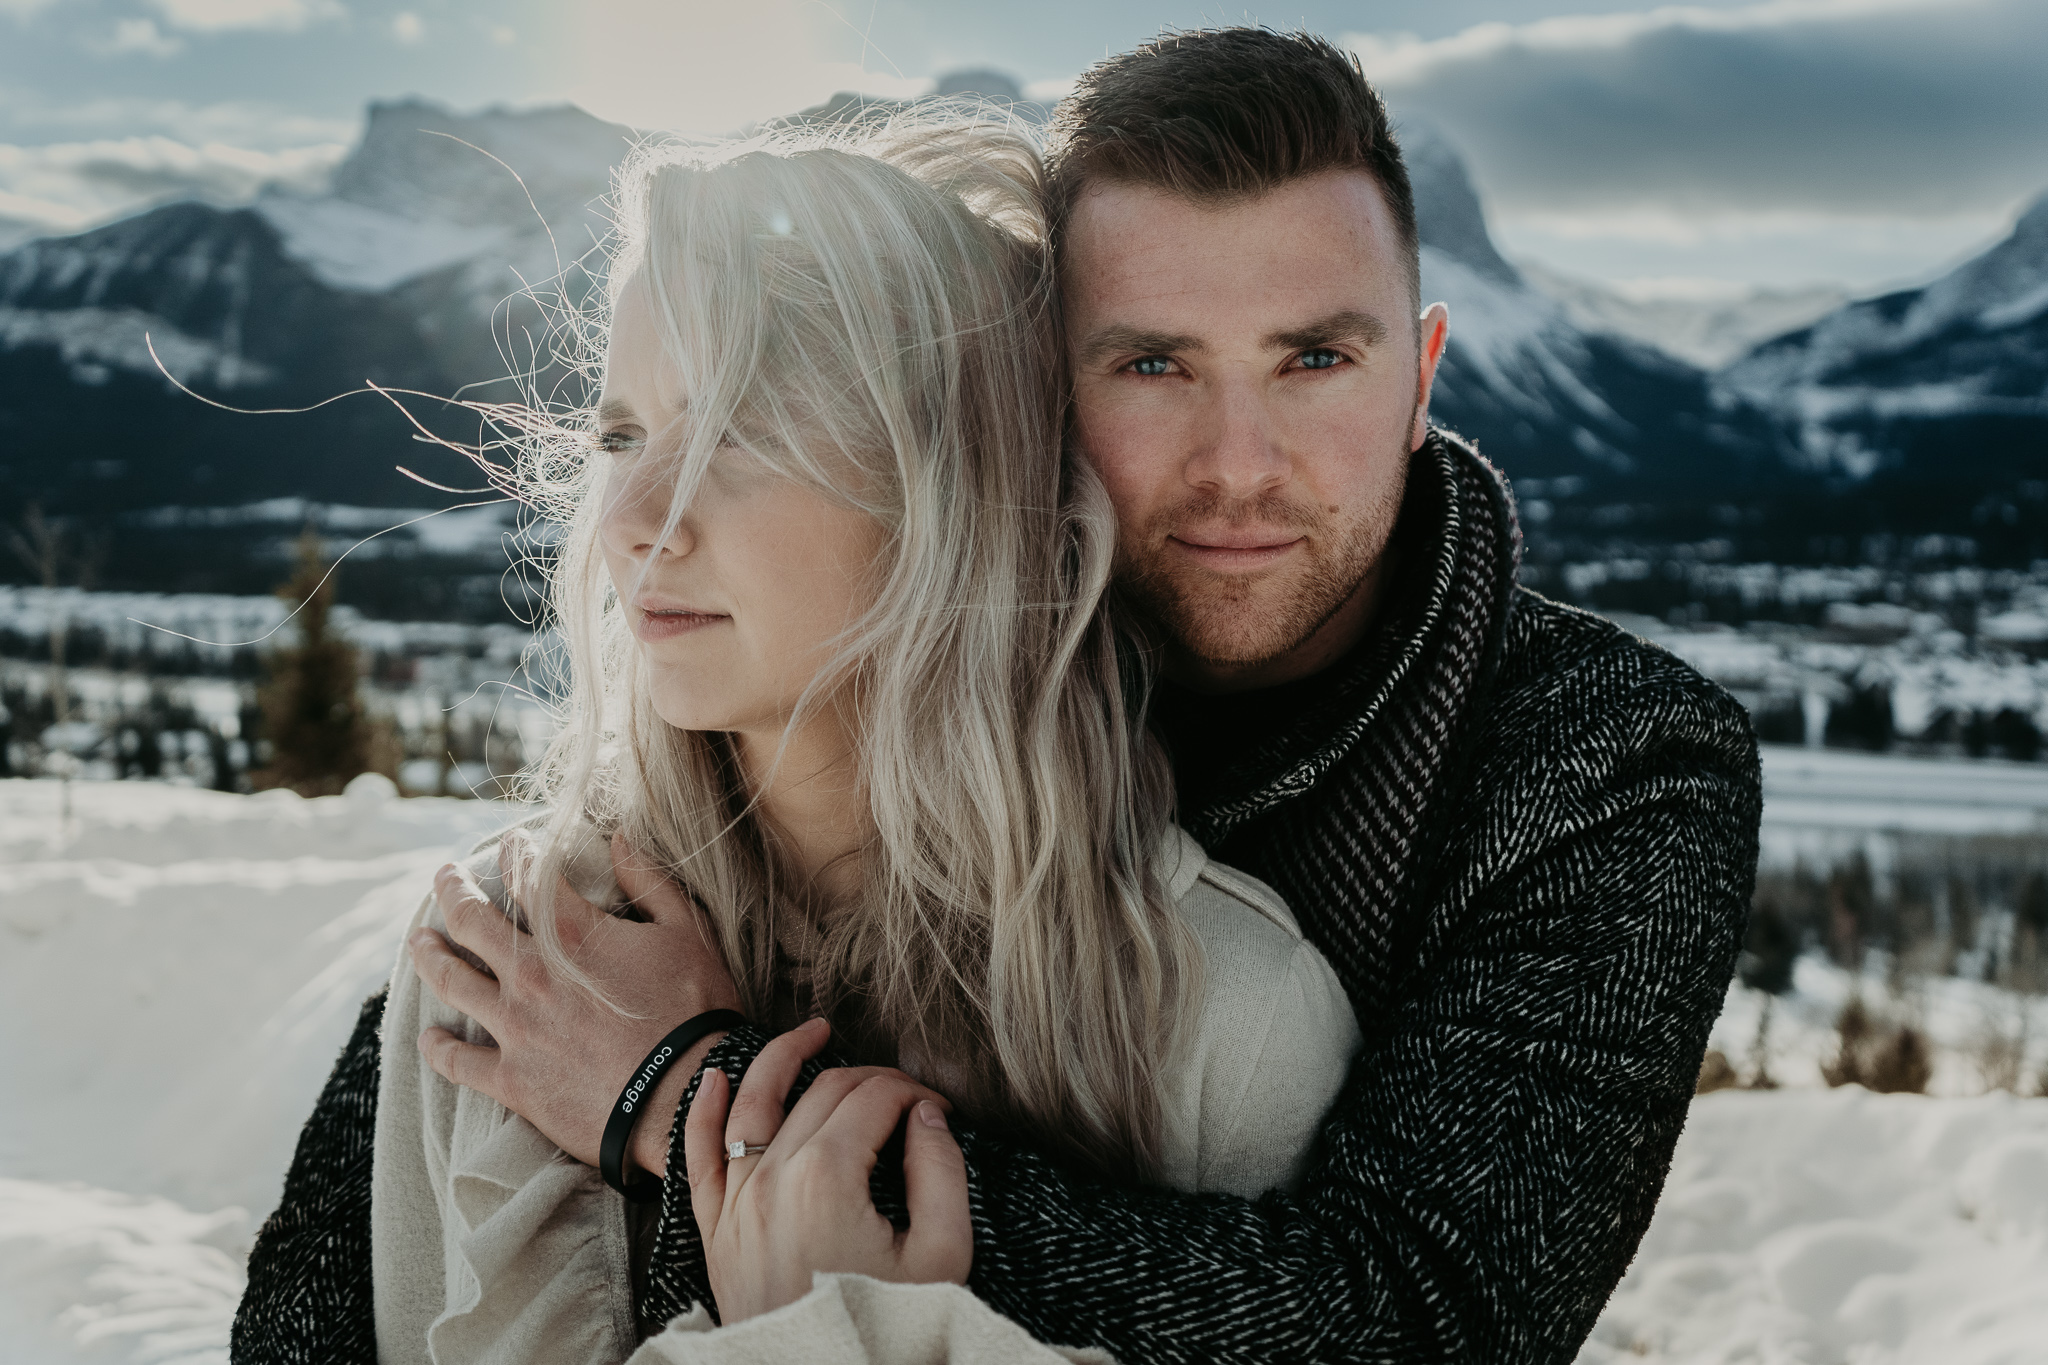 man holds blond woman from behind in the mountains